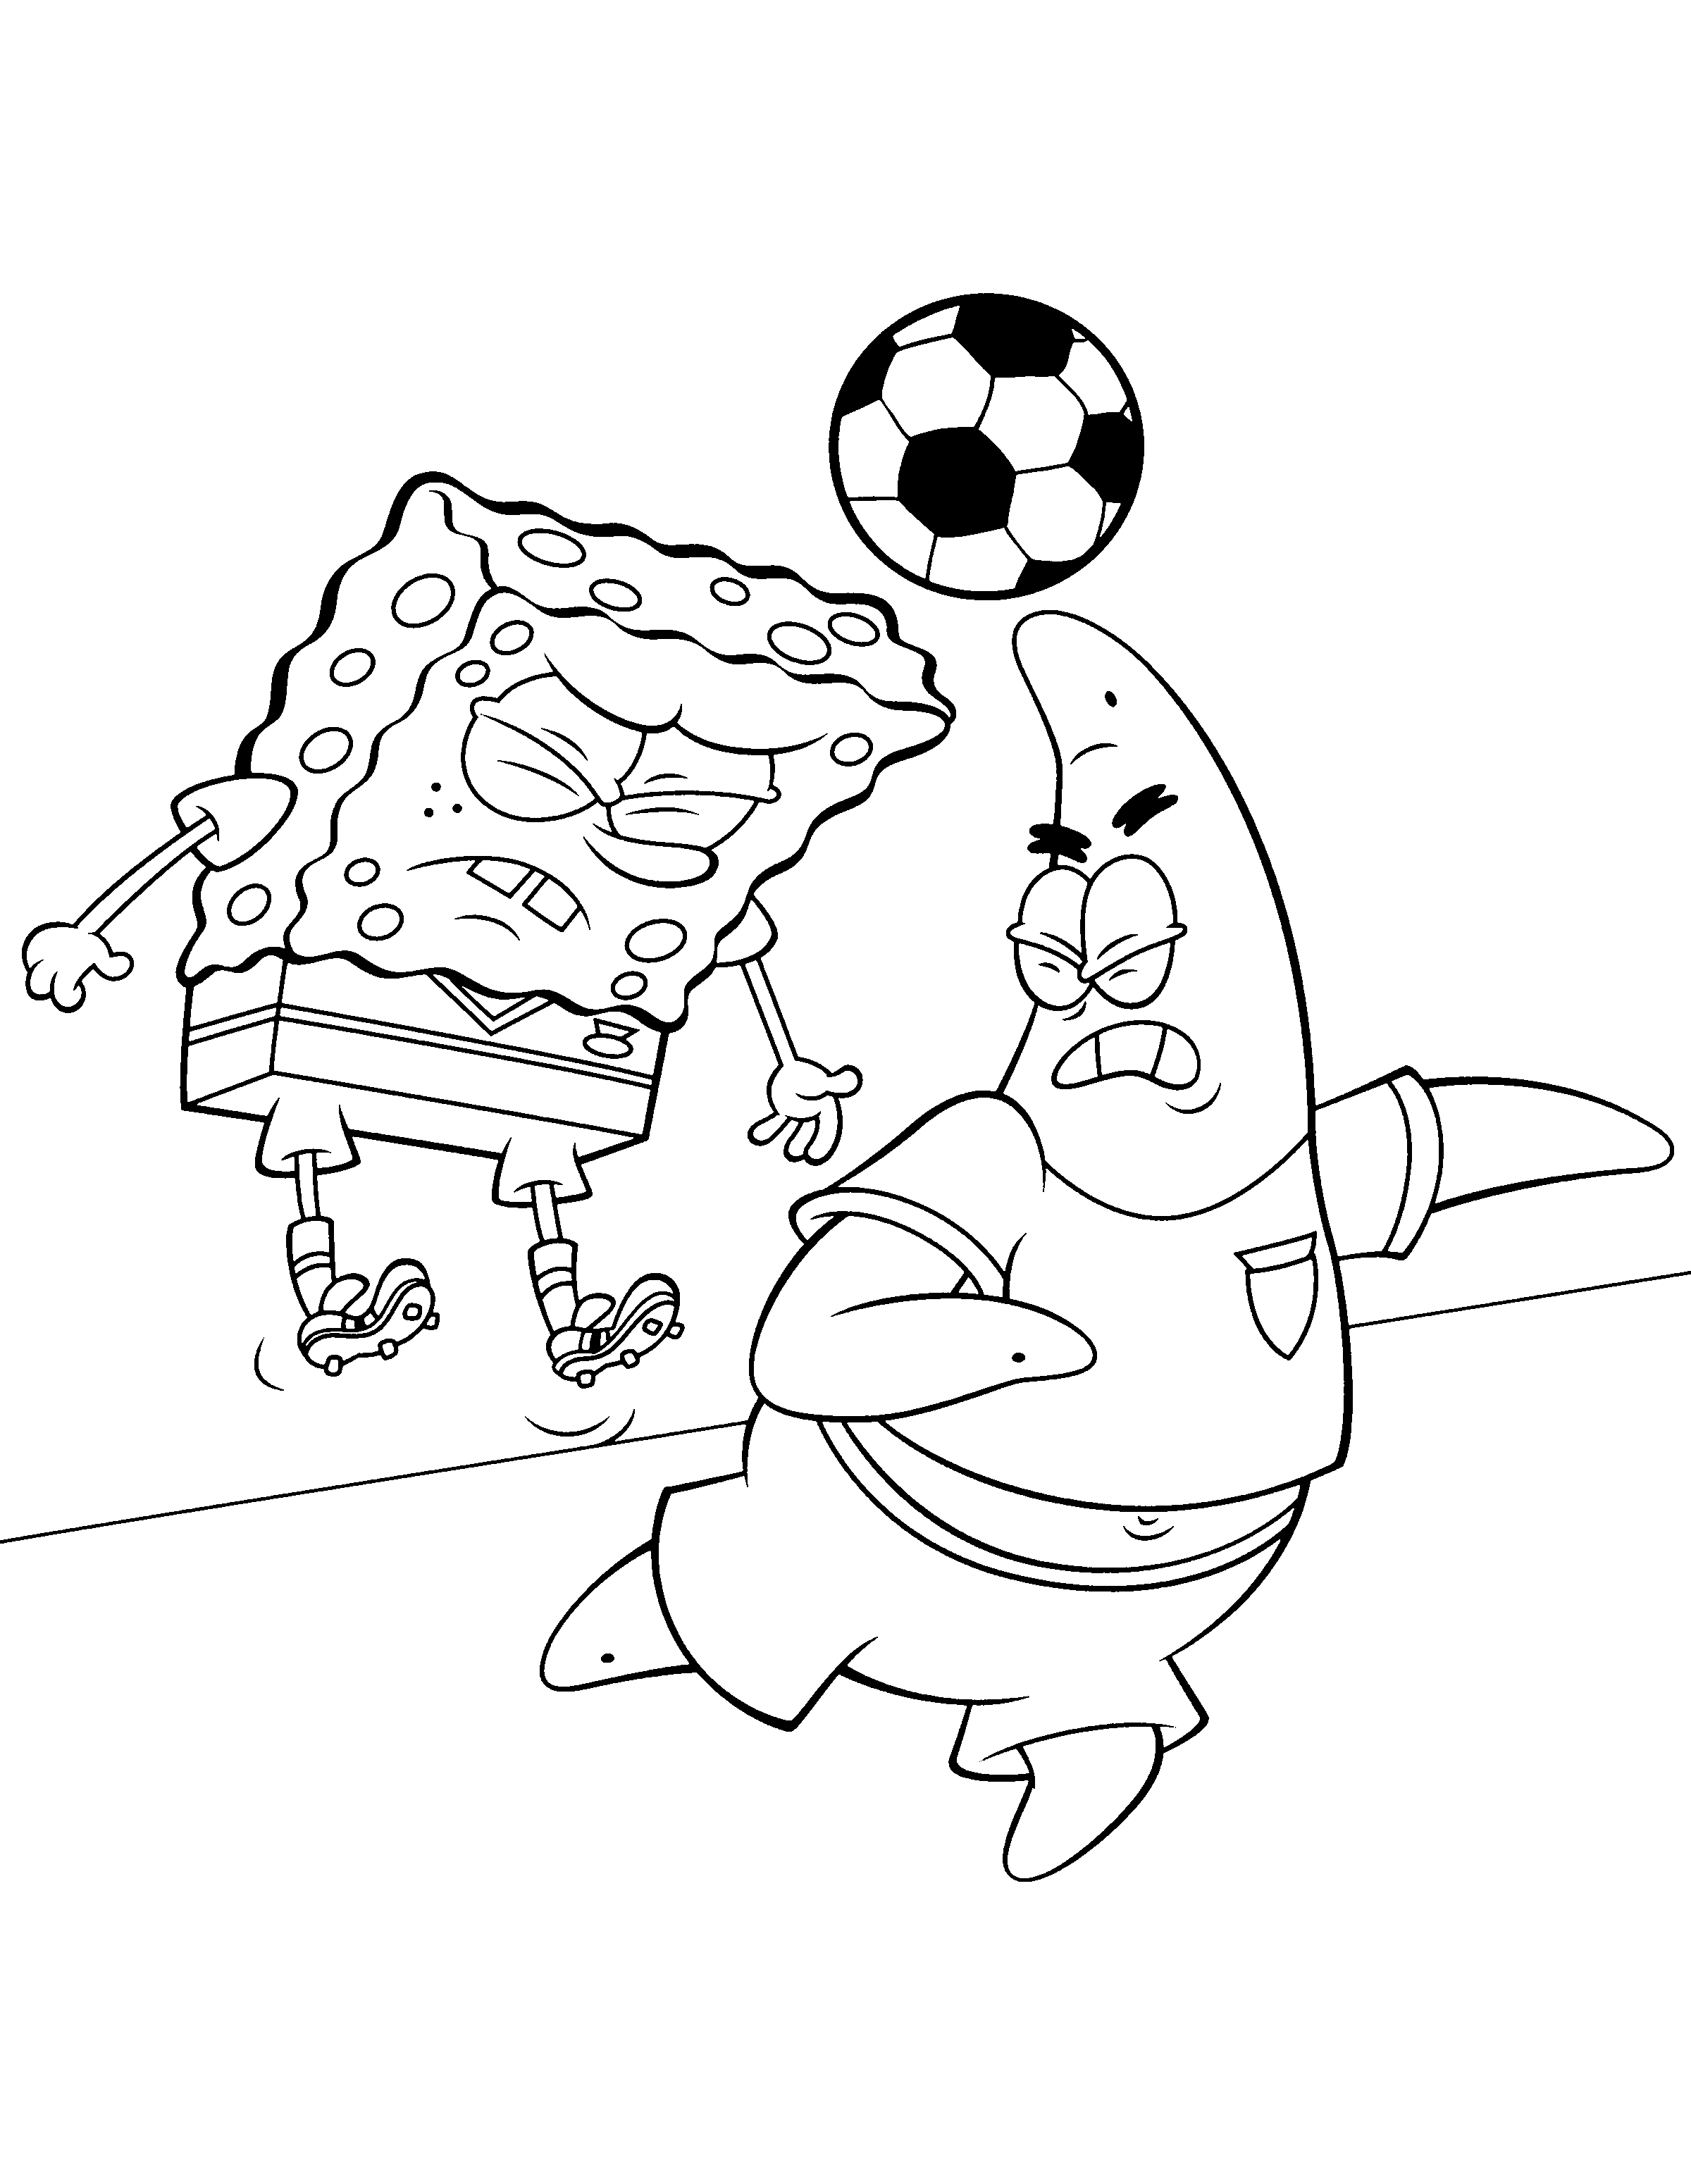 Soccer Spongebob And Patrick Coloring Pages